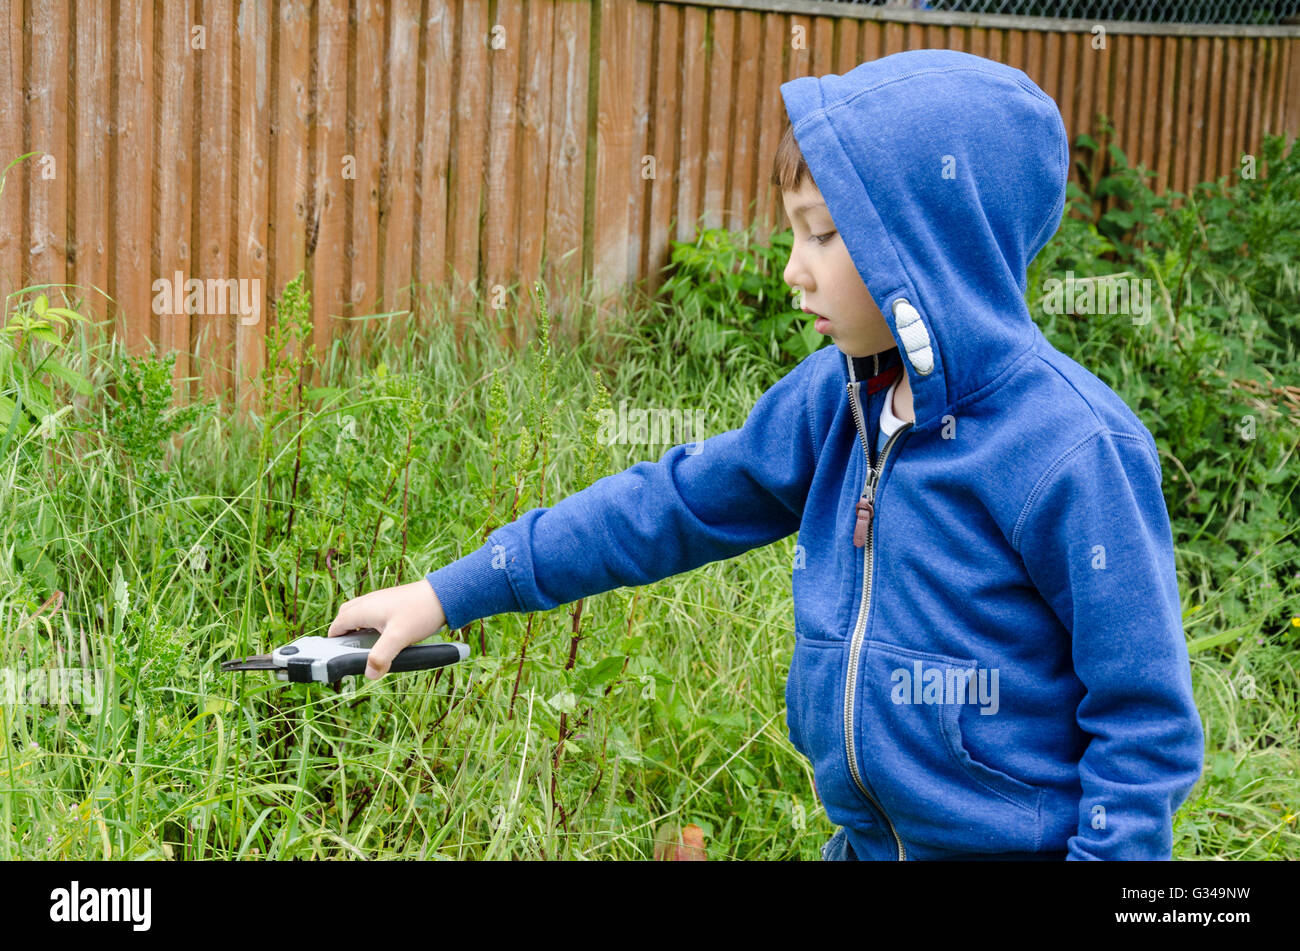 A young boy cutting weeds in the back garden with secateurs. Stock Photo